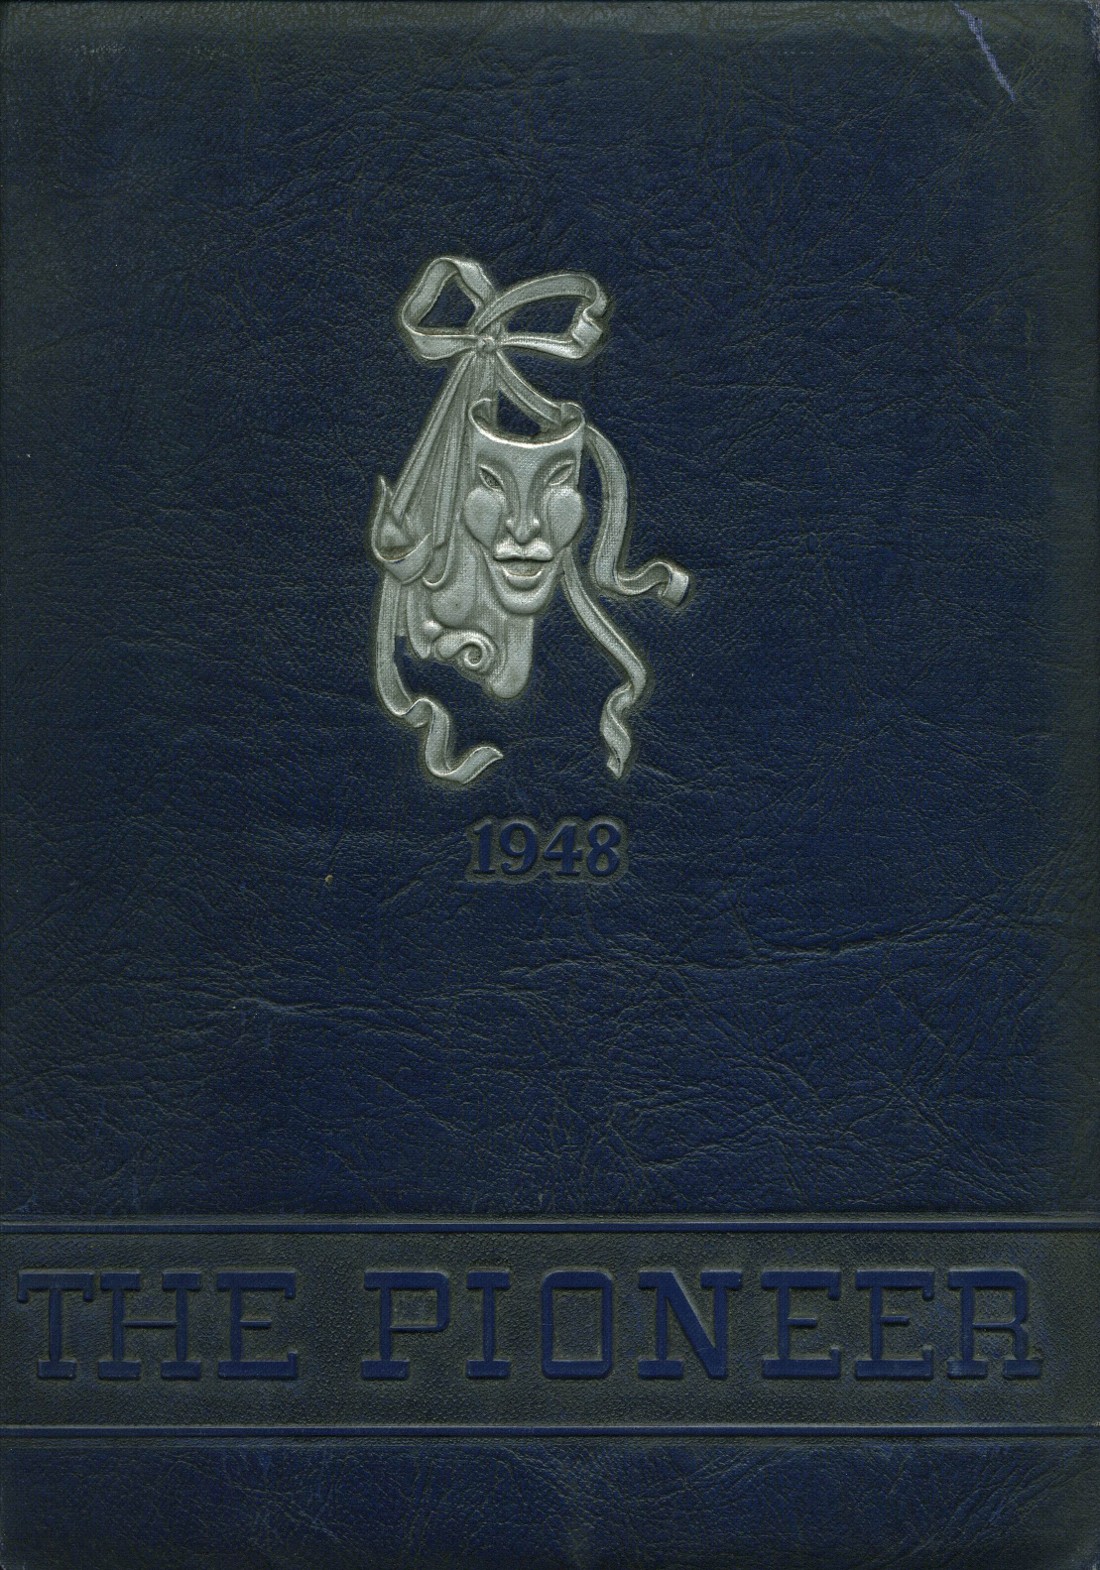 1948 yearbook from Andrew Lewis High School from Salem, Virginia for sale